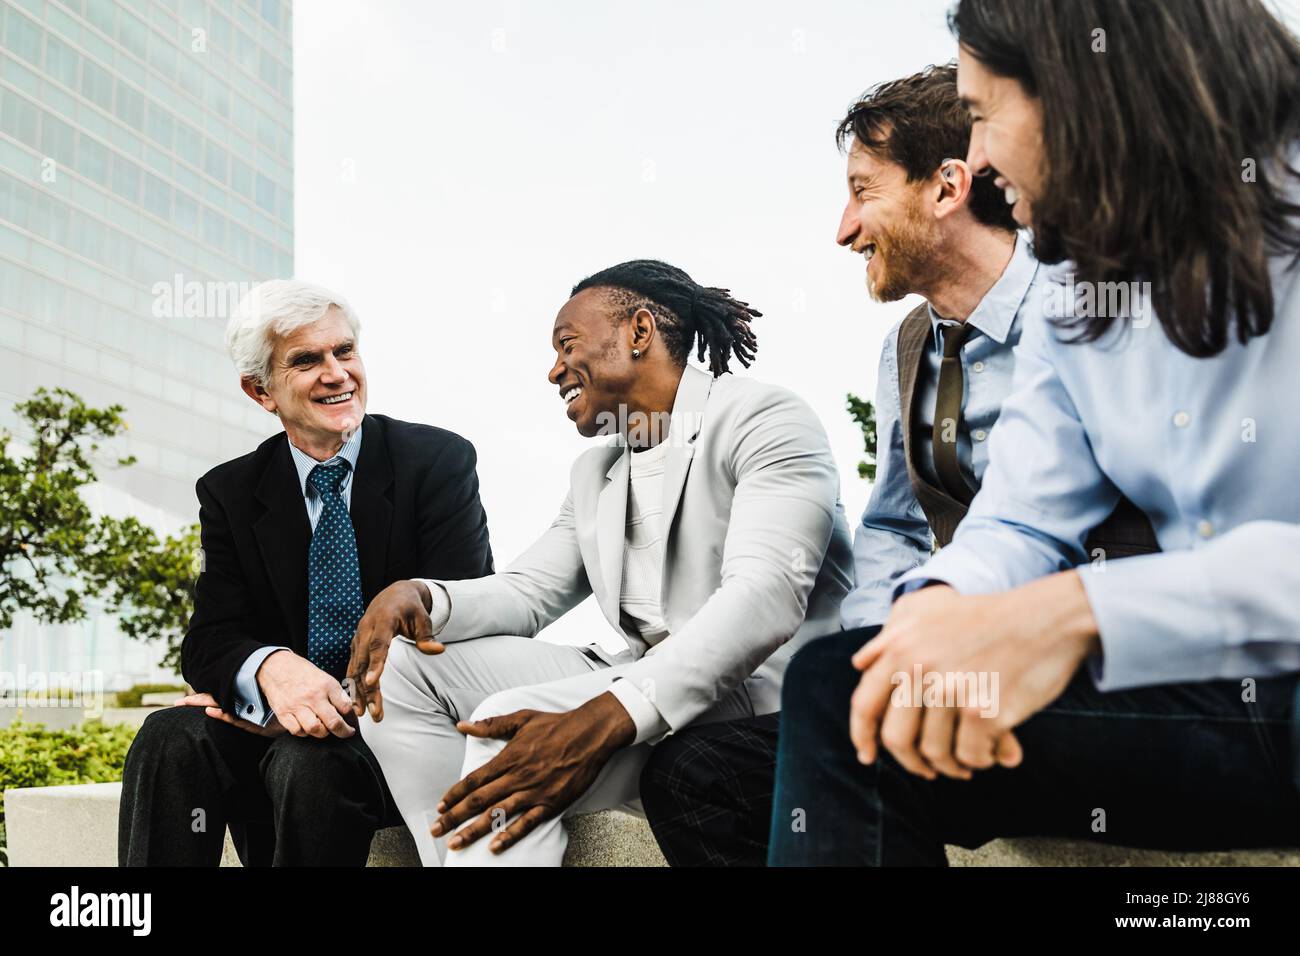 Business people with different ages and ethnicities talking together outside the office Stock Photo